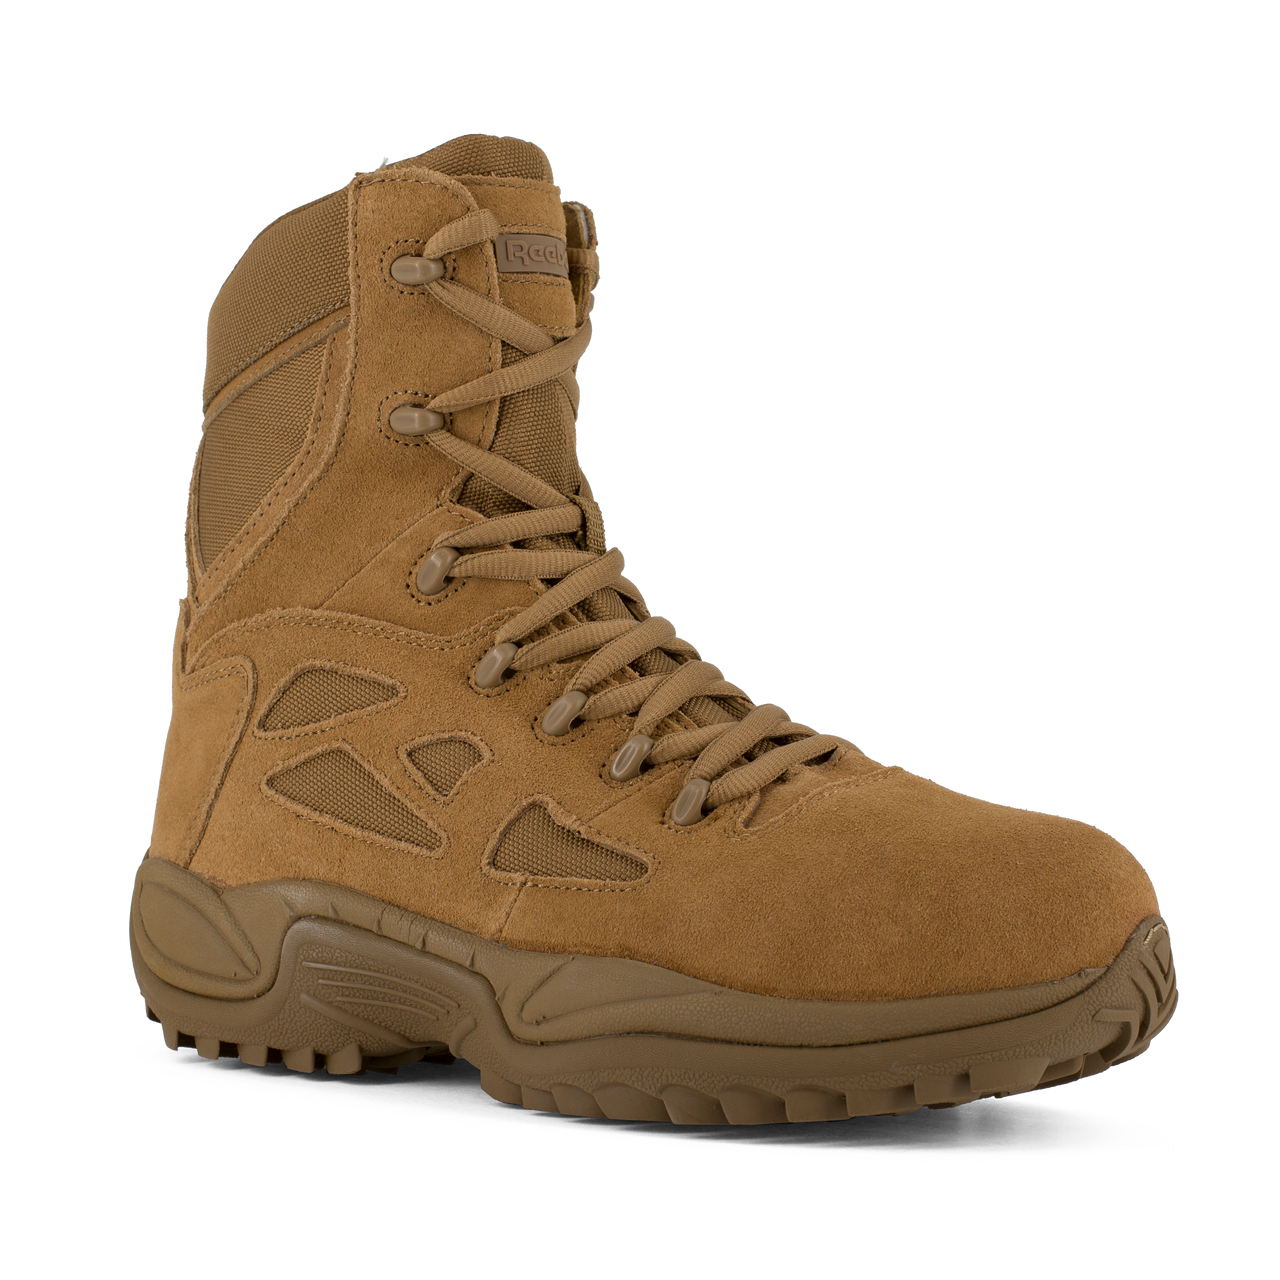 Reebok Rapid Response 8" Stealth Boot with Side Zipper - Coyote - Men - RB8850